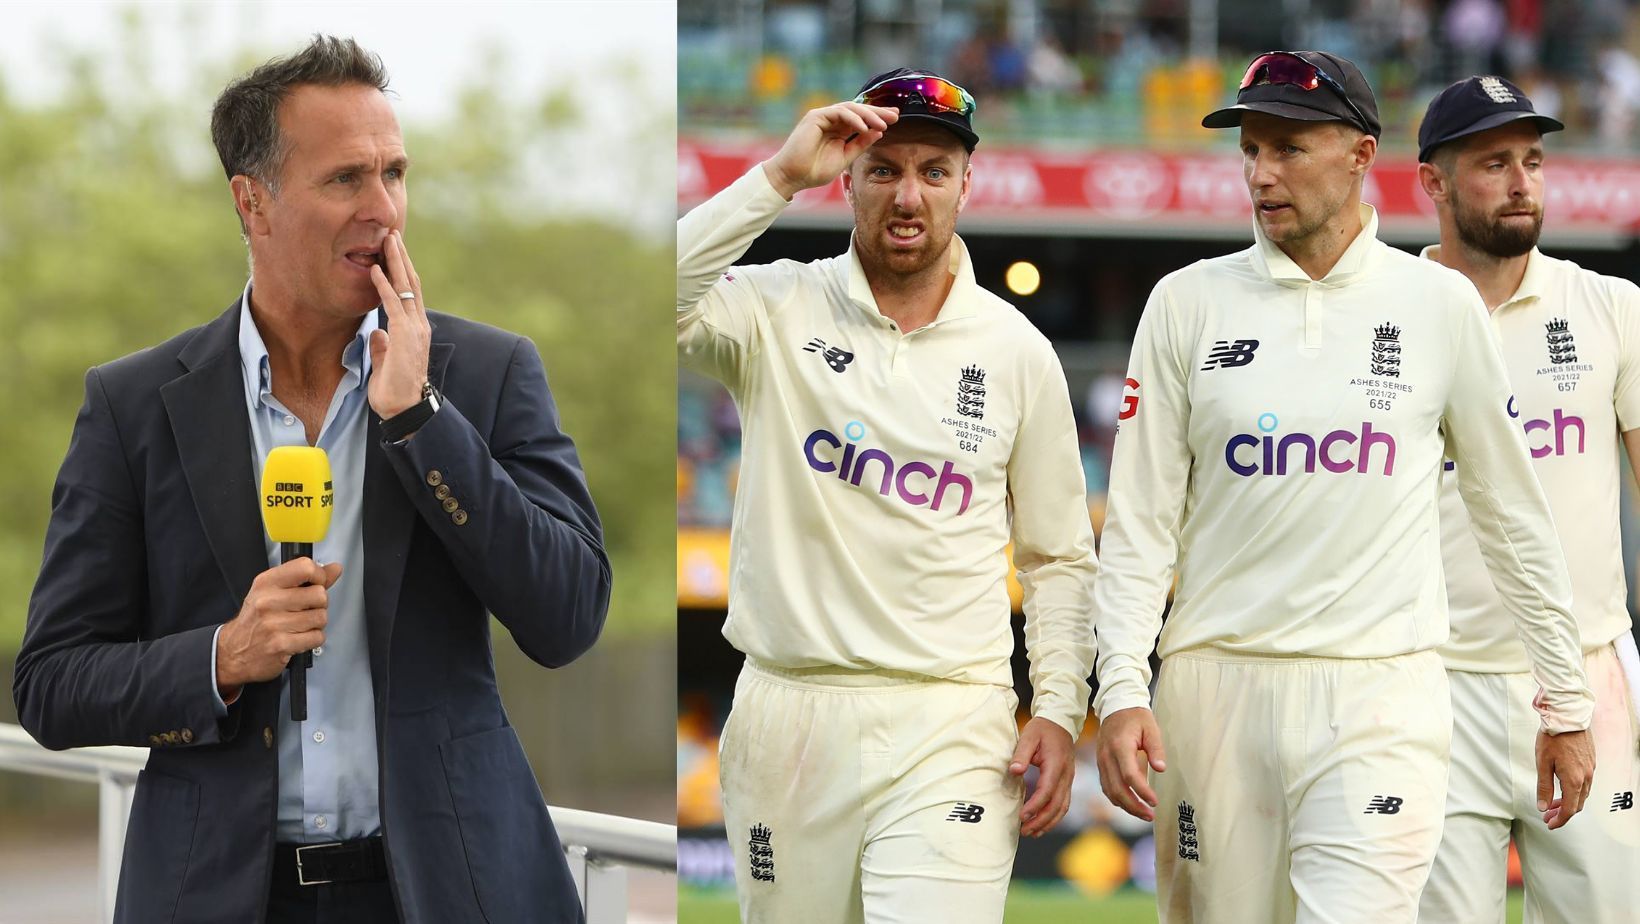 Michael Vaughan (L, PC: mirror.co.uk) criticizes Joe Root and Co. after Gabba defeat.